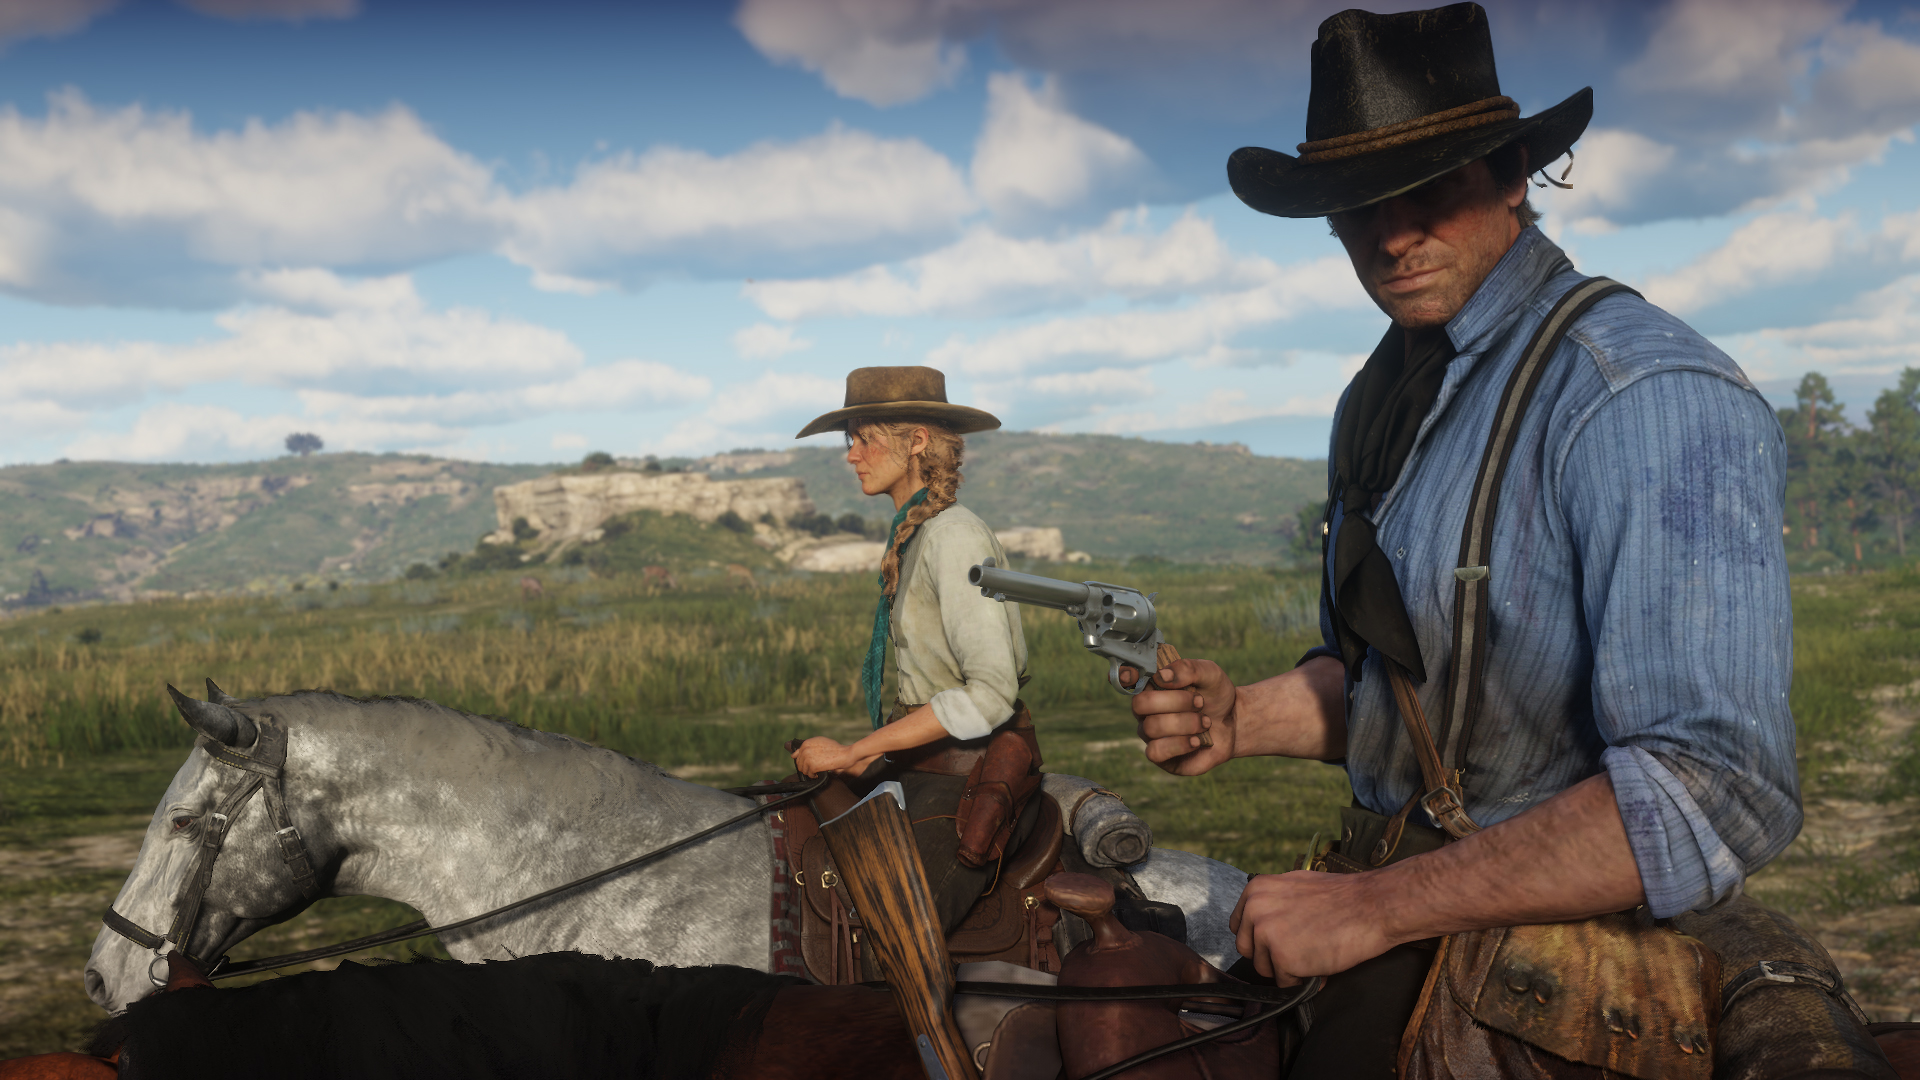 Fan-made Red Dead Redemption Remaster reportedly killed off by Take-Two -  GameRevolution